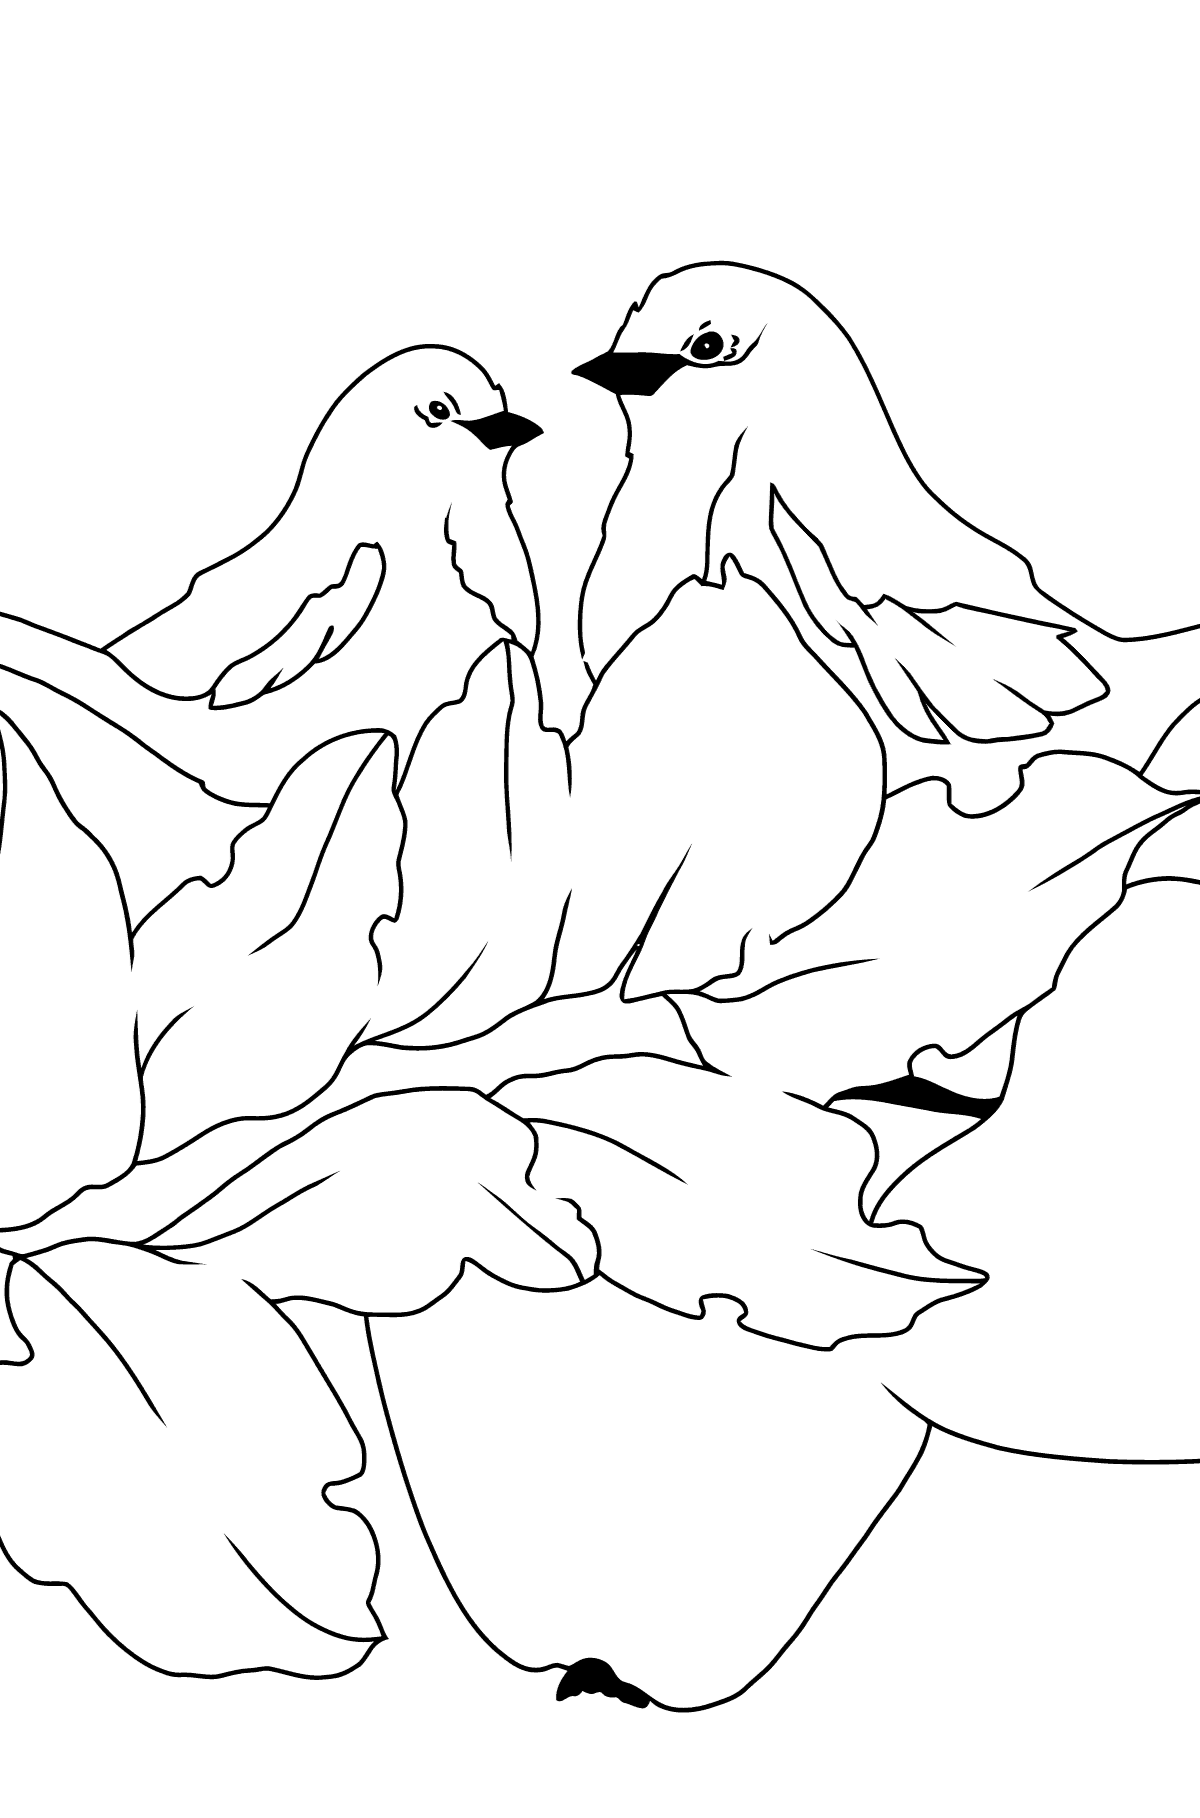 Autumn Coloring Page - Birds on the Branch of an Apple Tree - Coloring Pages for Children